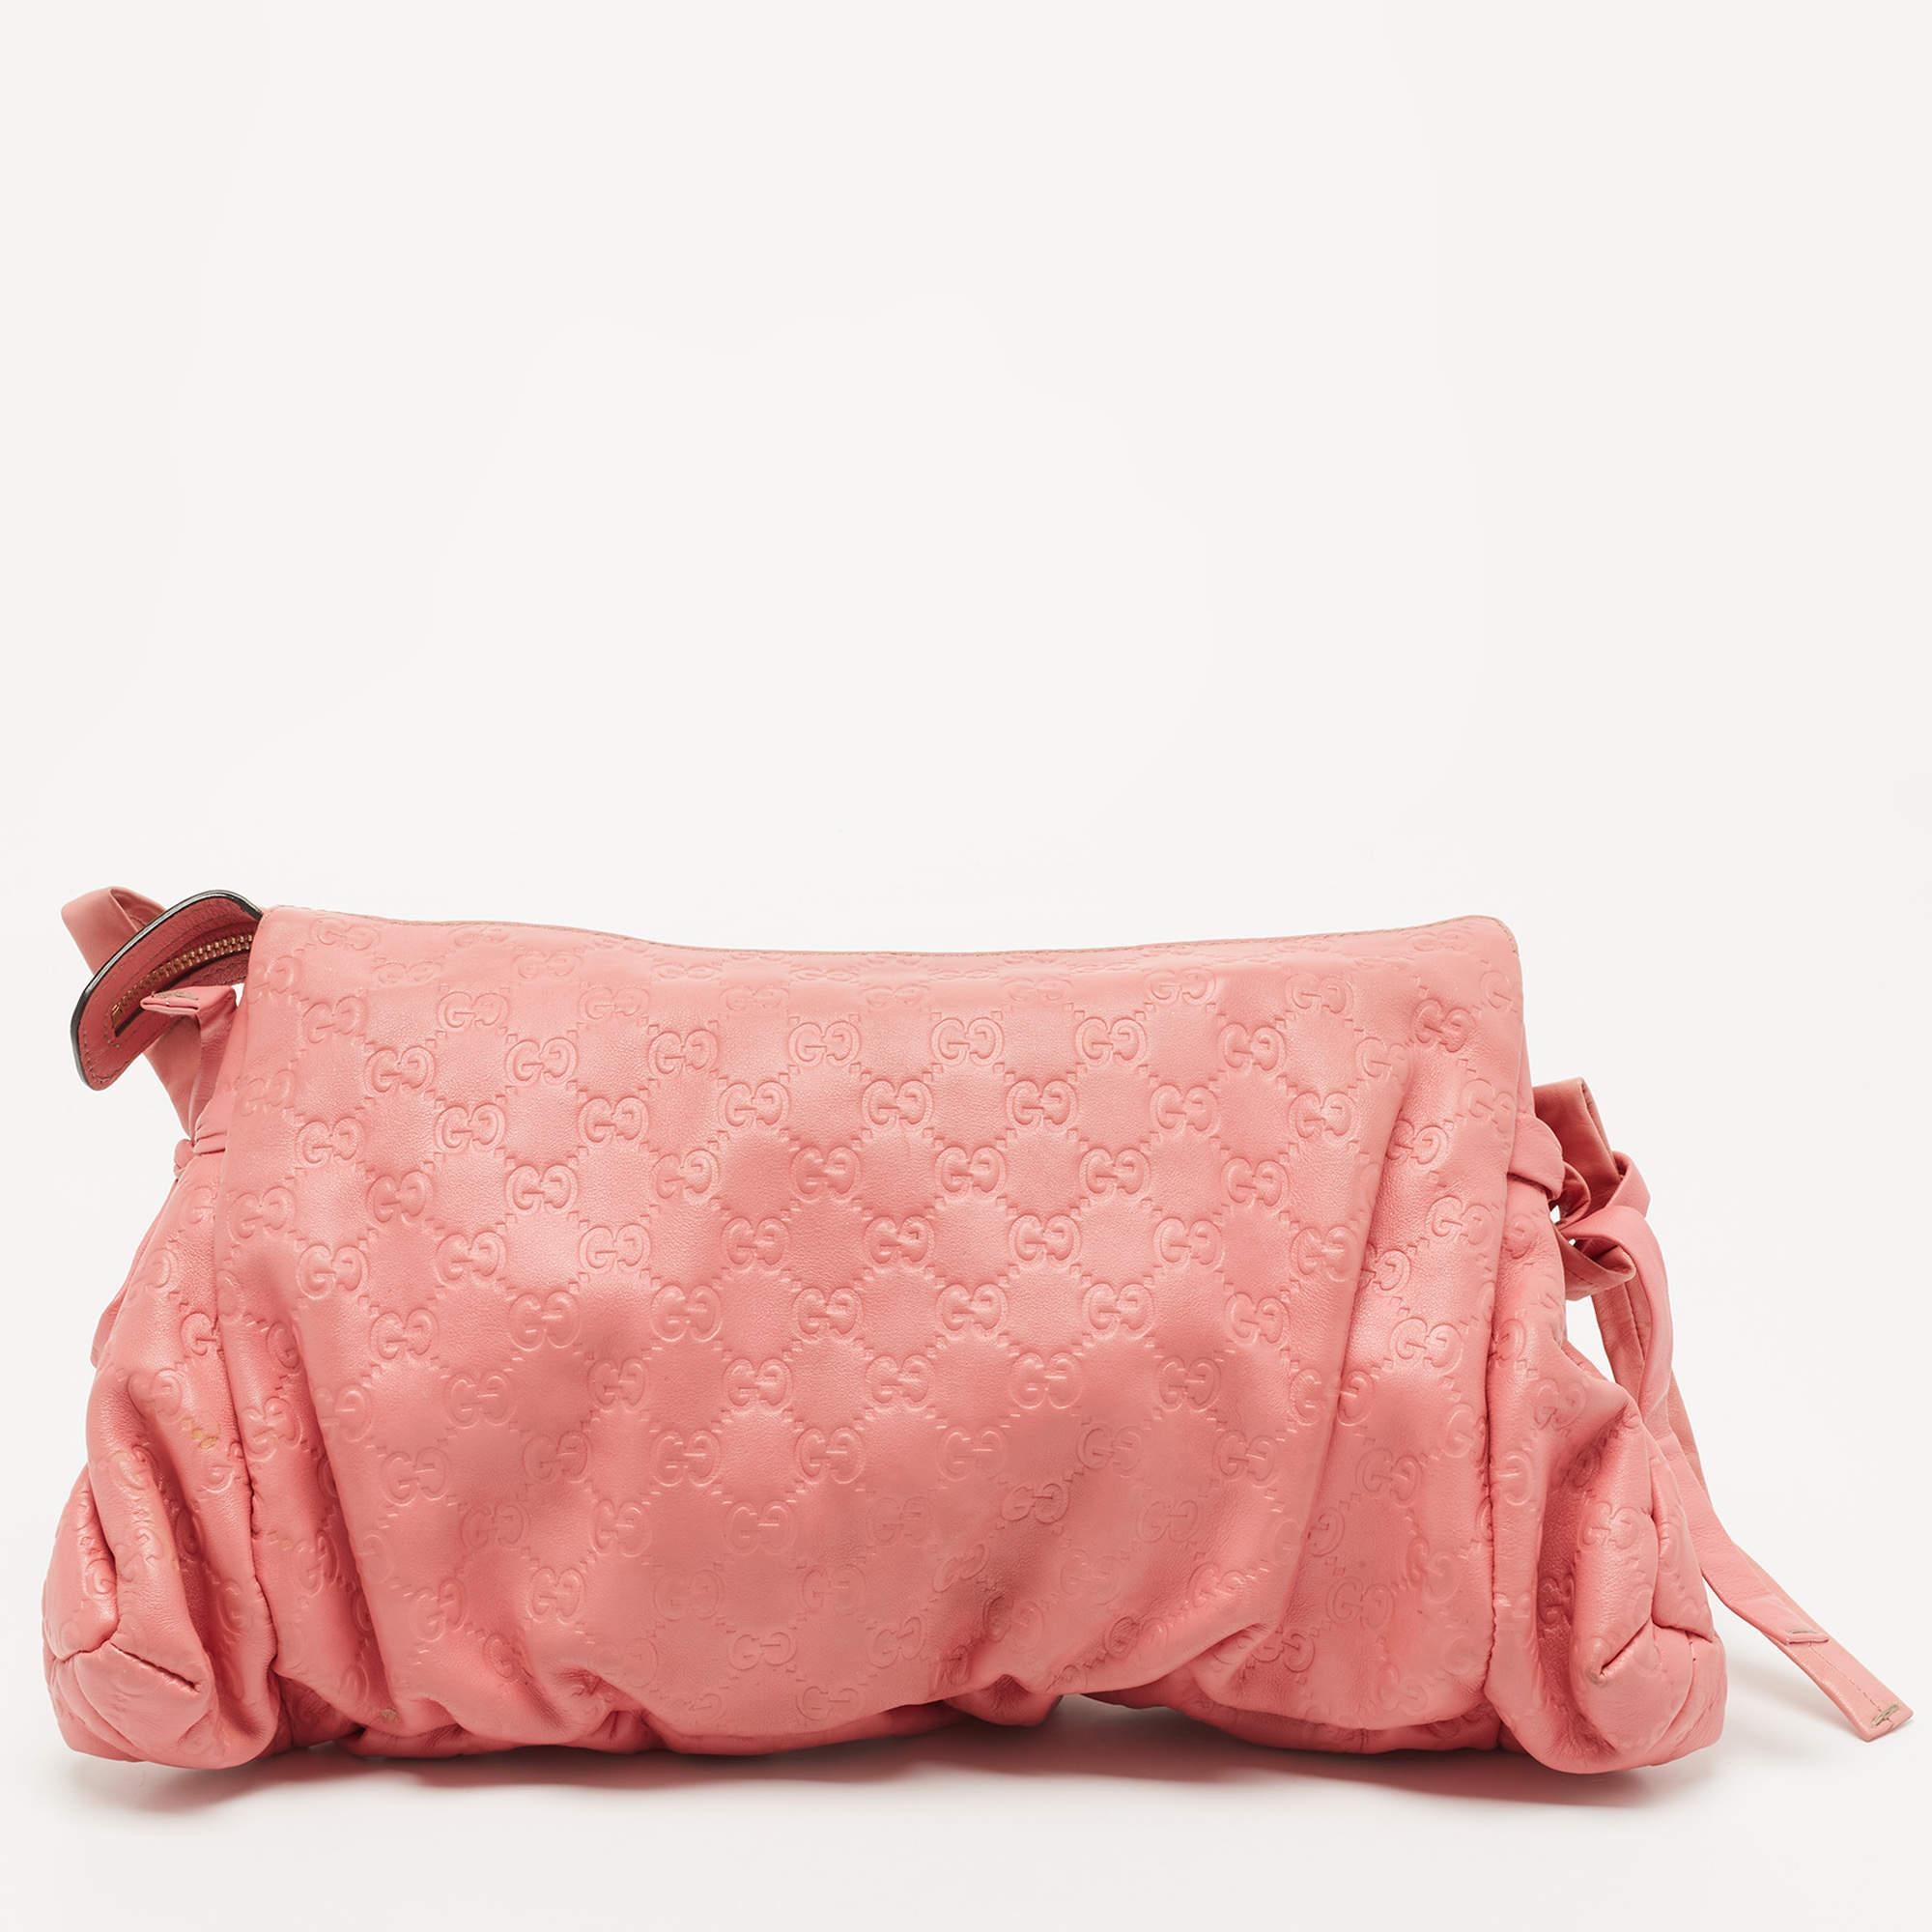 Women's Gucci Pink Guccissima Leather Large Hysteria Wristlet Clutch